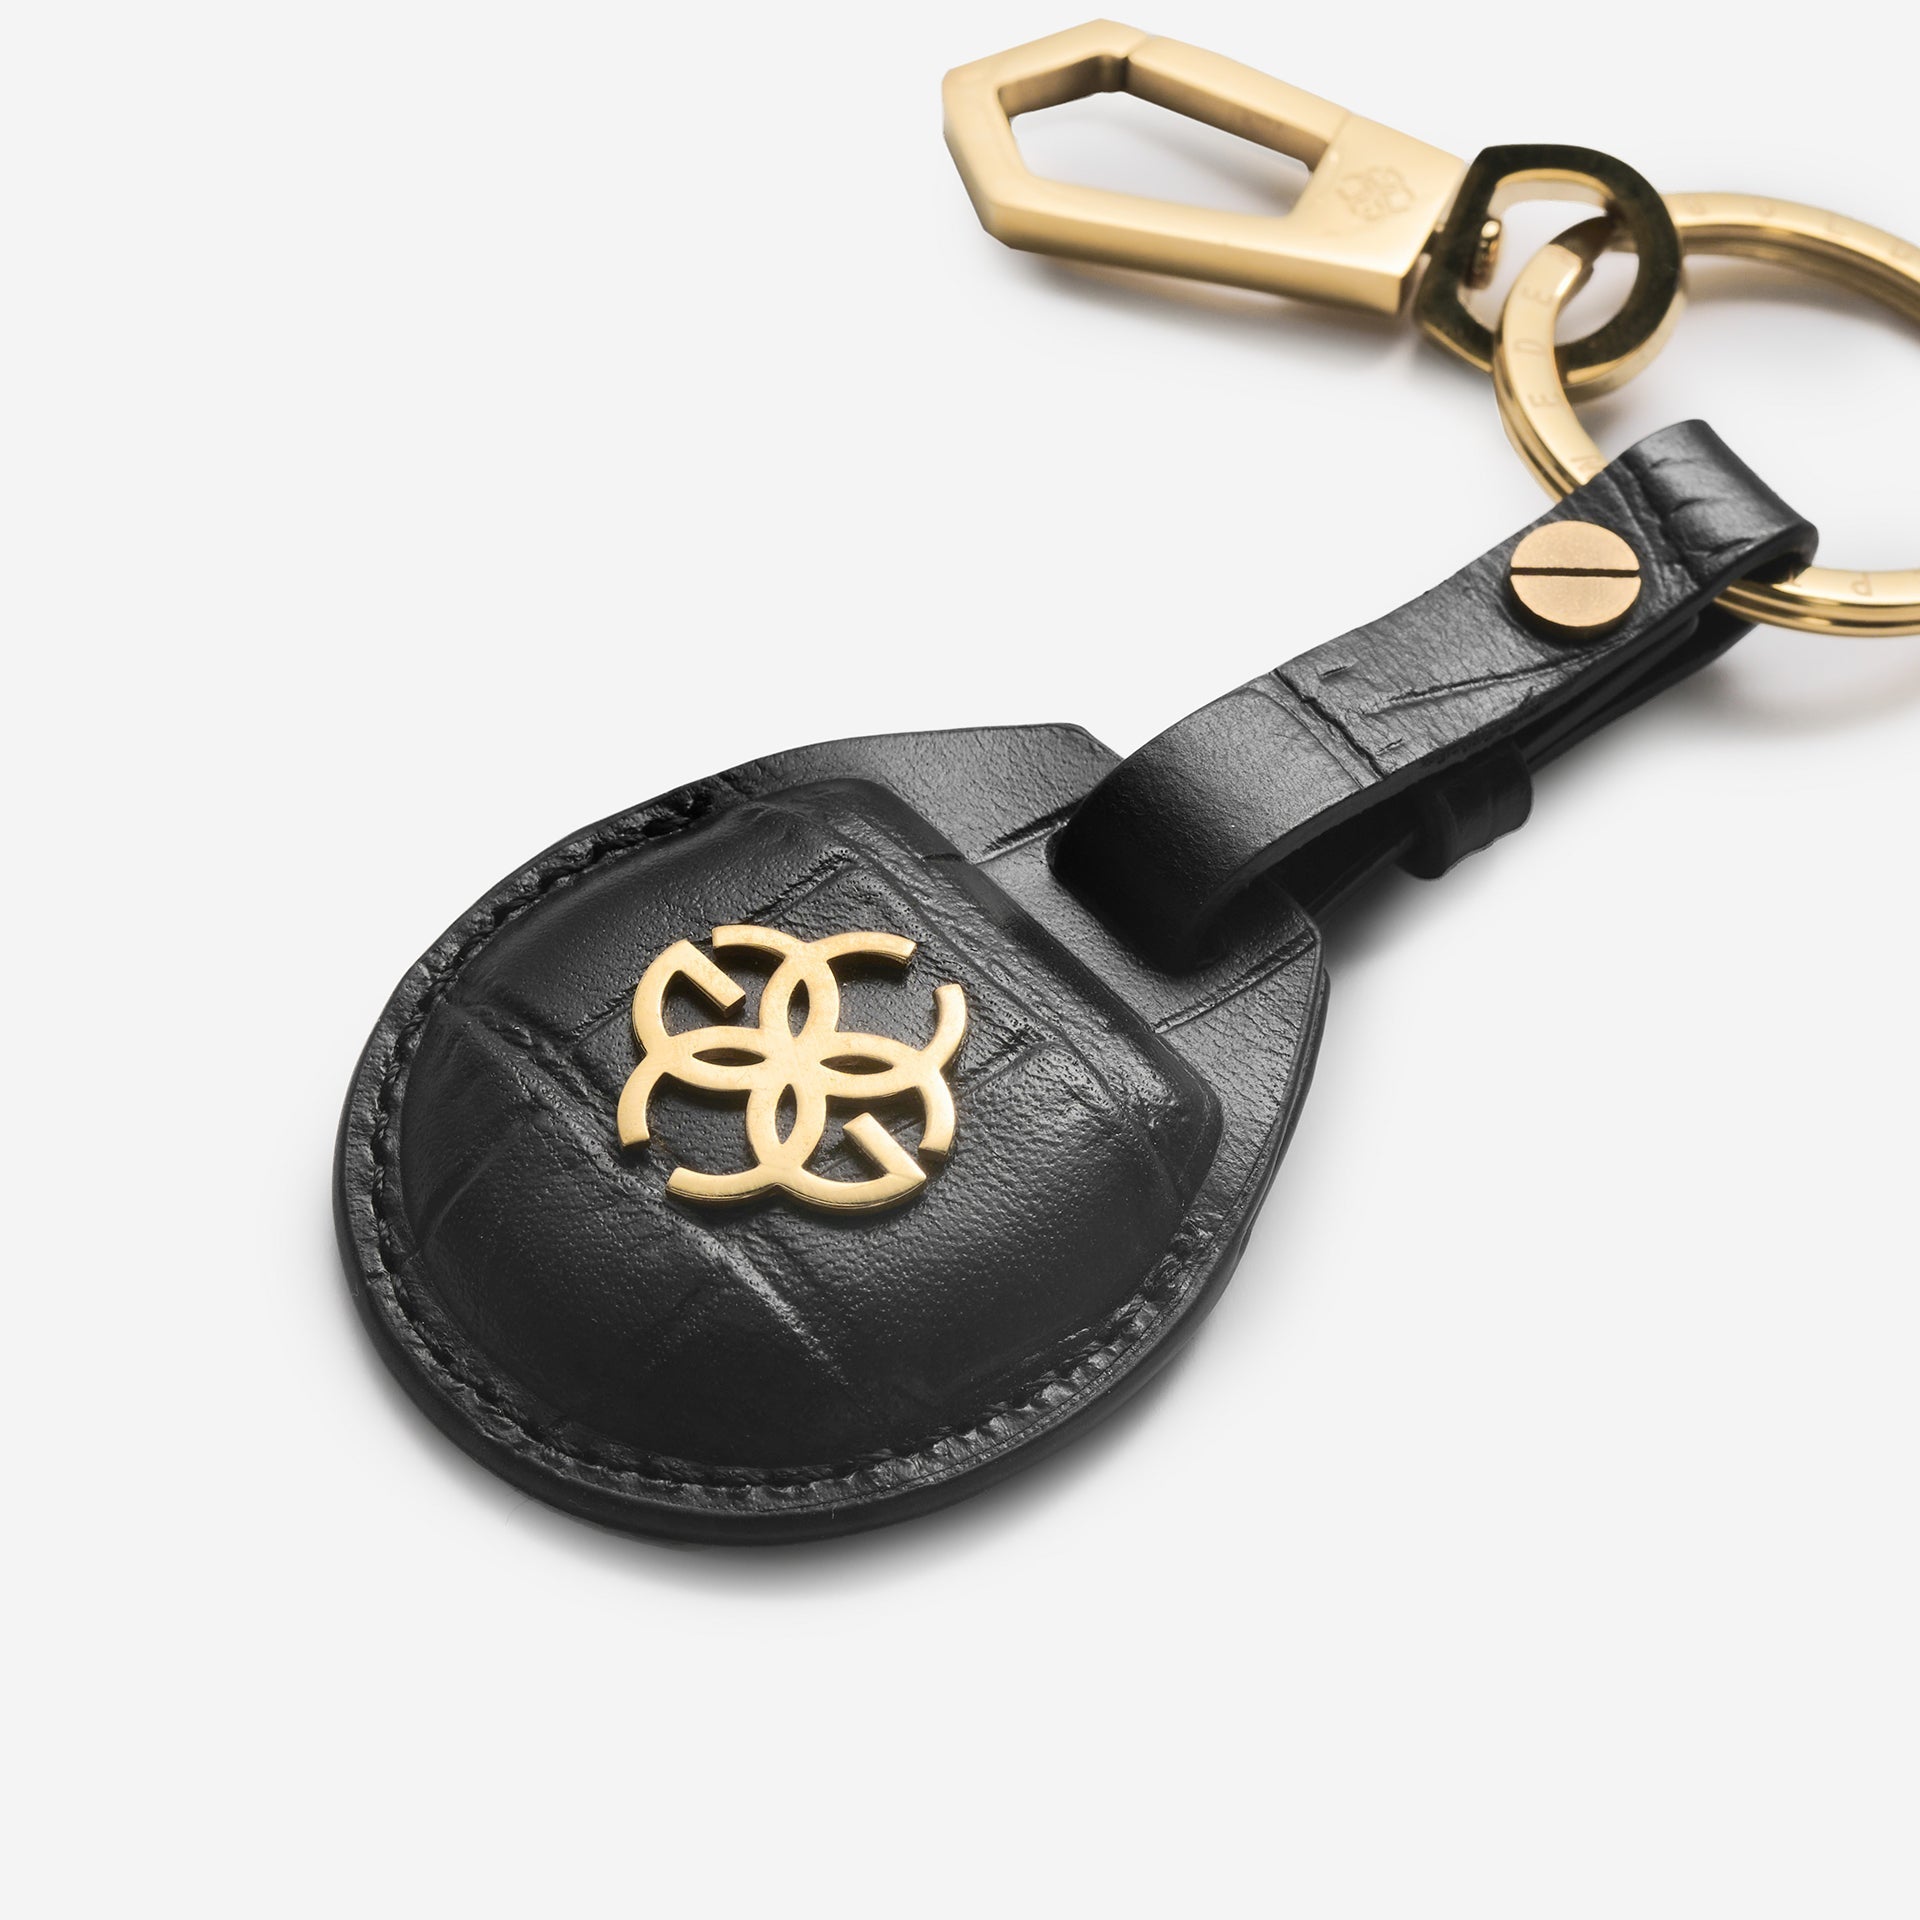 Golden Concept - Leather Accessories - Keychain - Airtag Croco